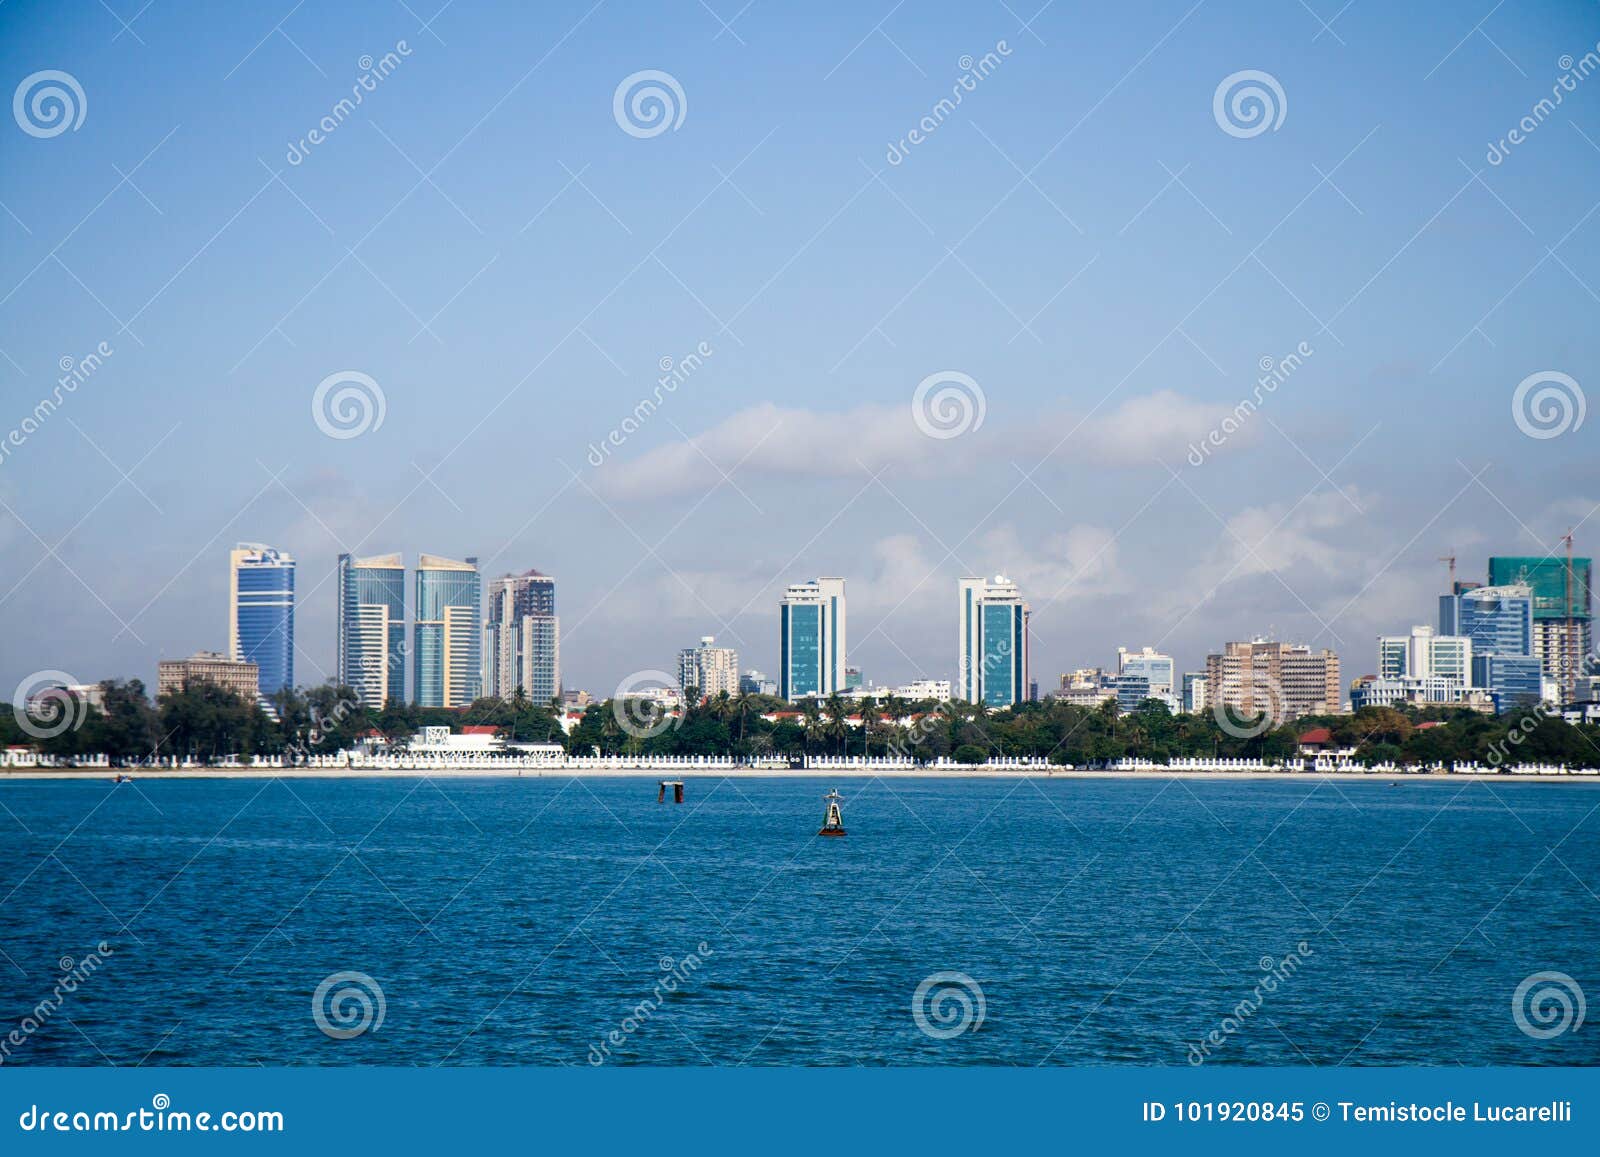 dar es salaam view from the sea